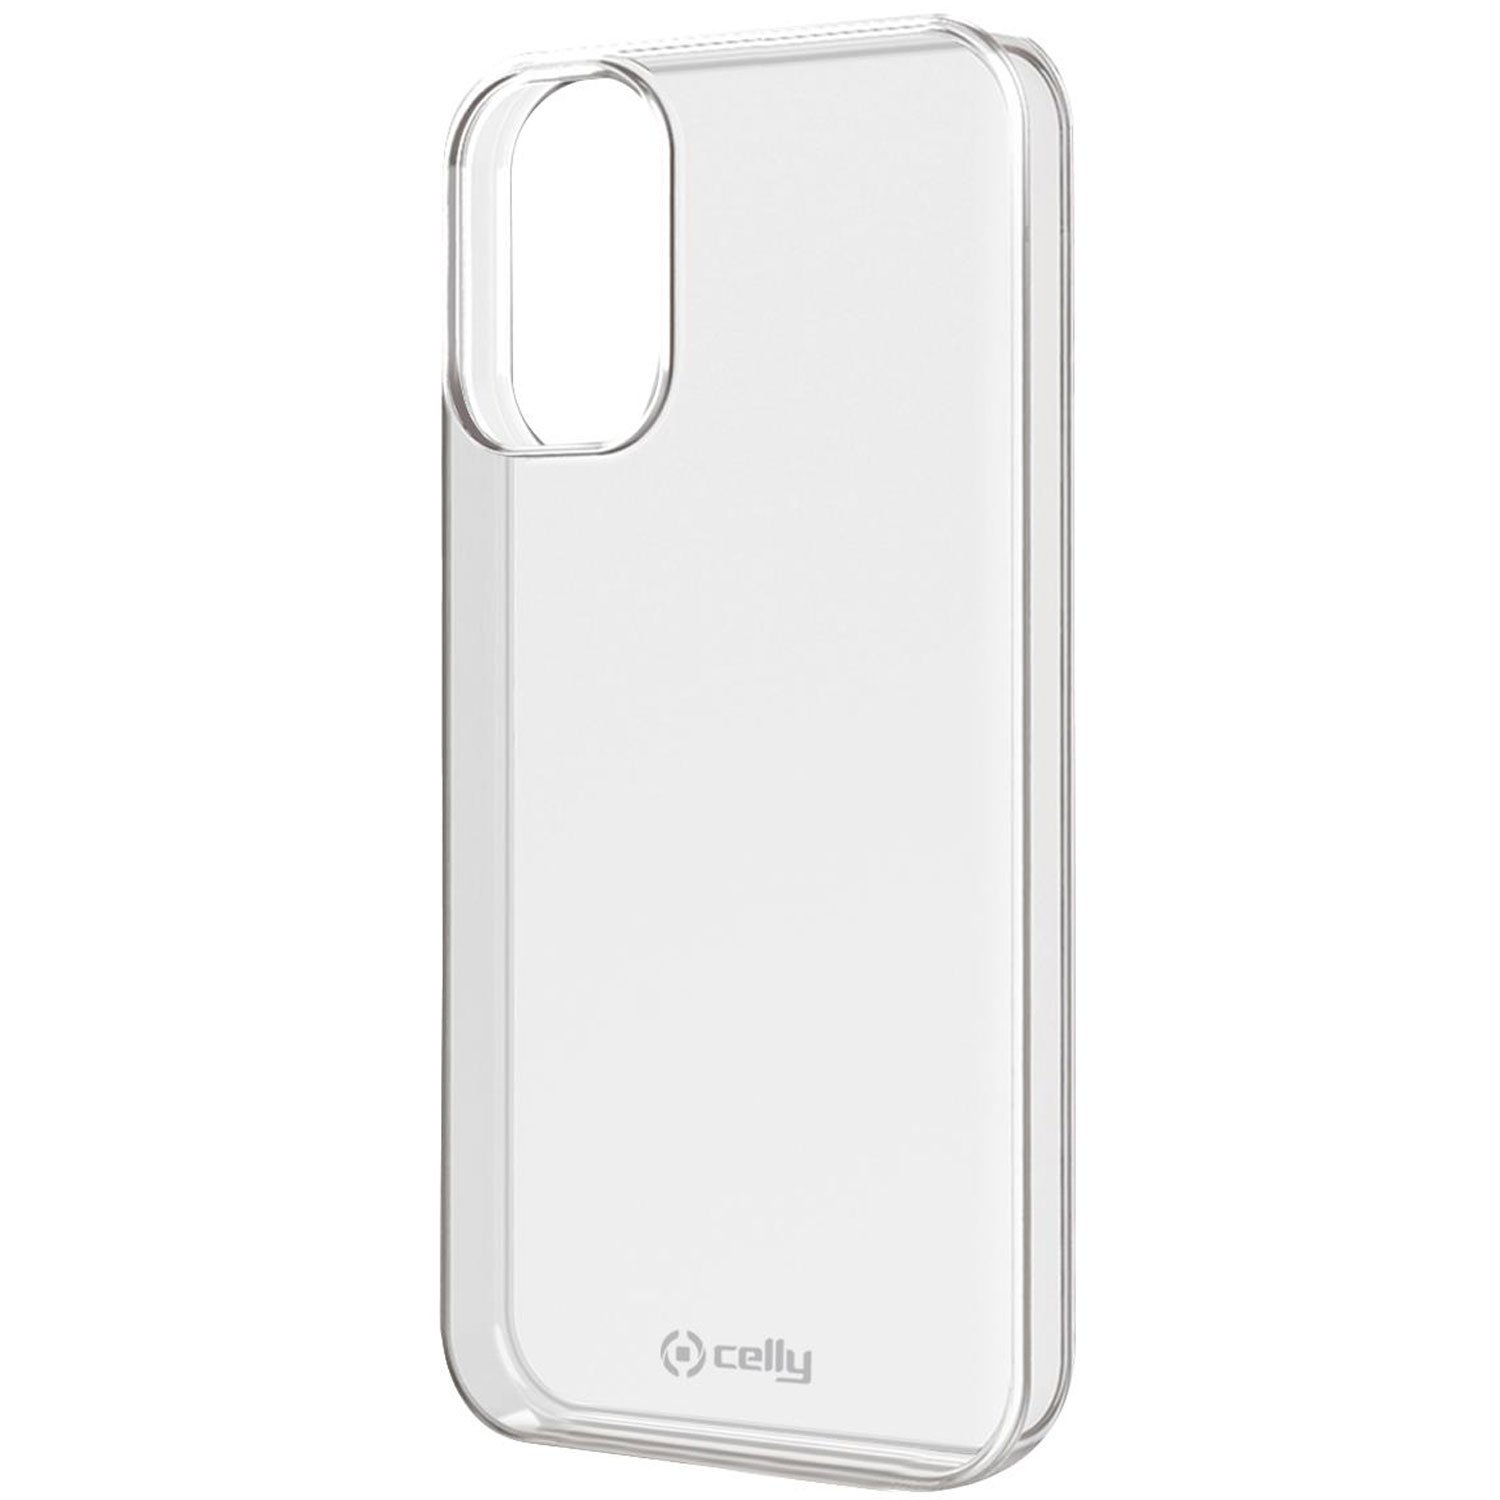 Celly Gelskin TPU Cover Galaxy Xcover 5 Transparent